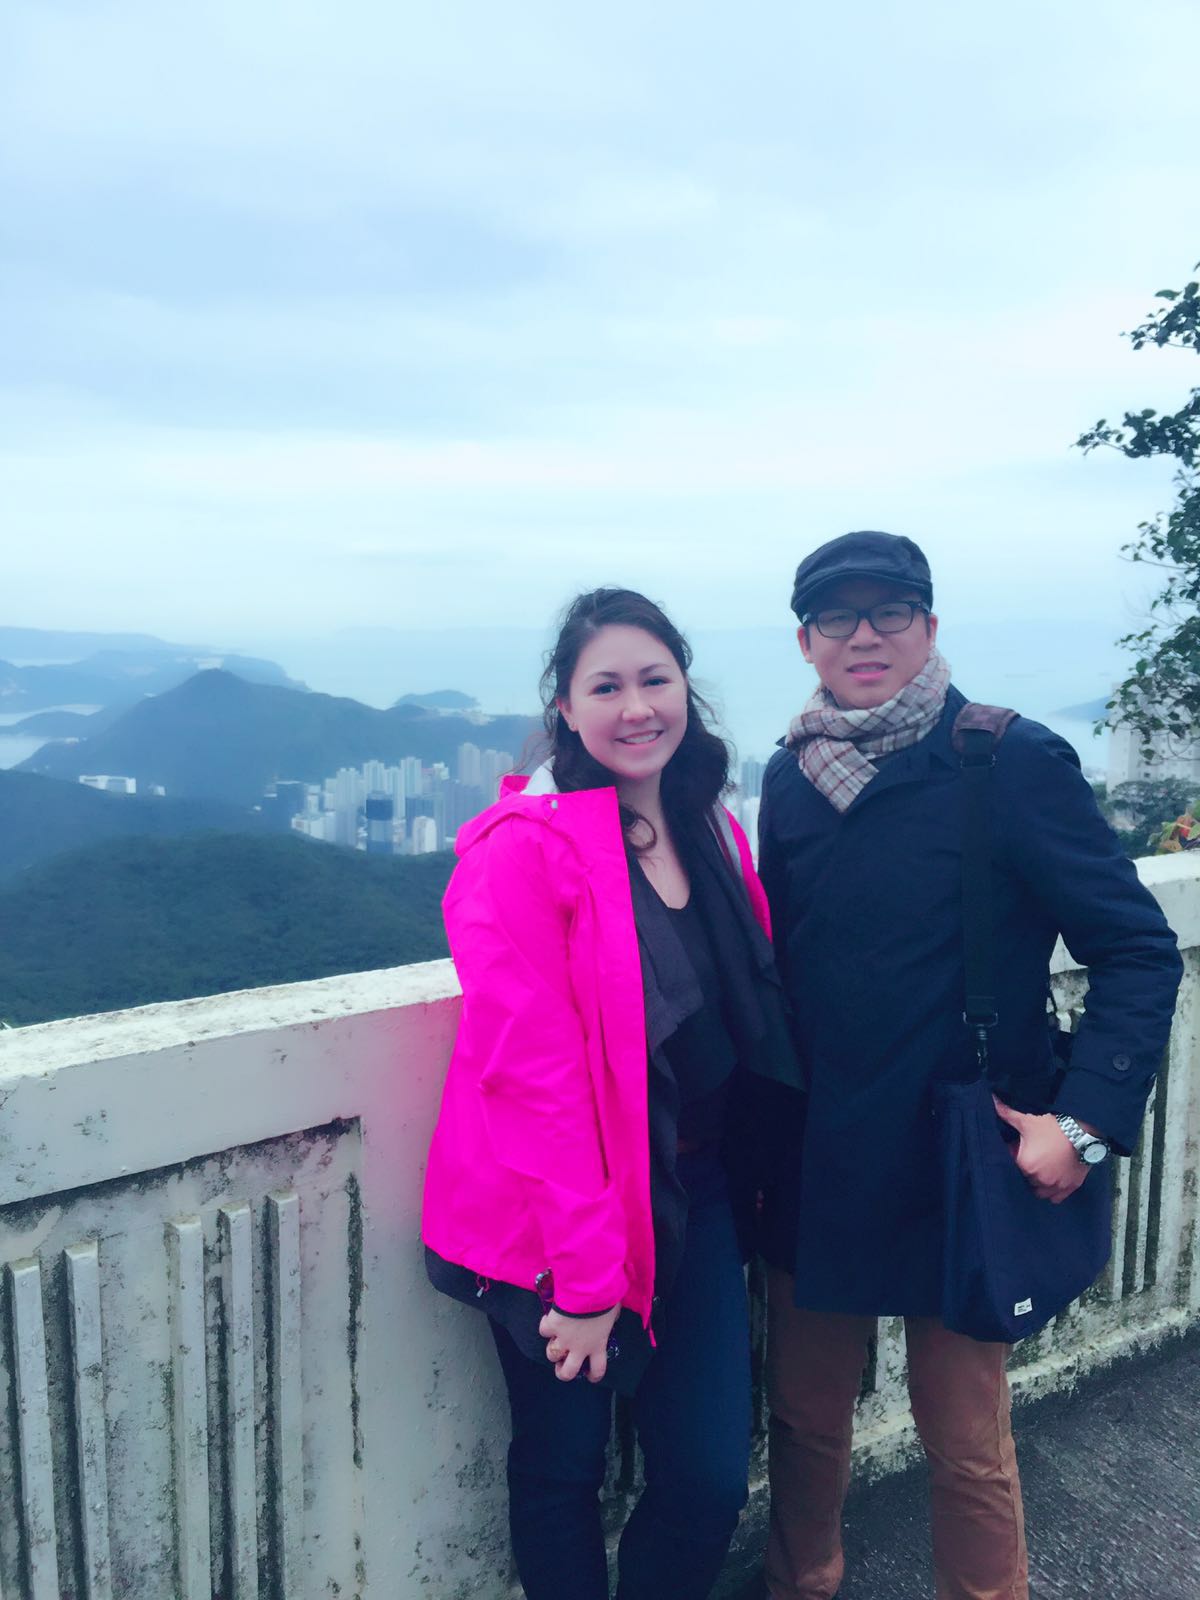 Frank the tour guide and a solo traveler client Miss Galloway took photo at the Victoria Peak.